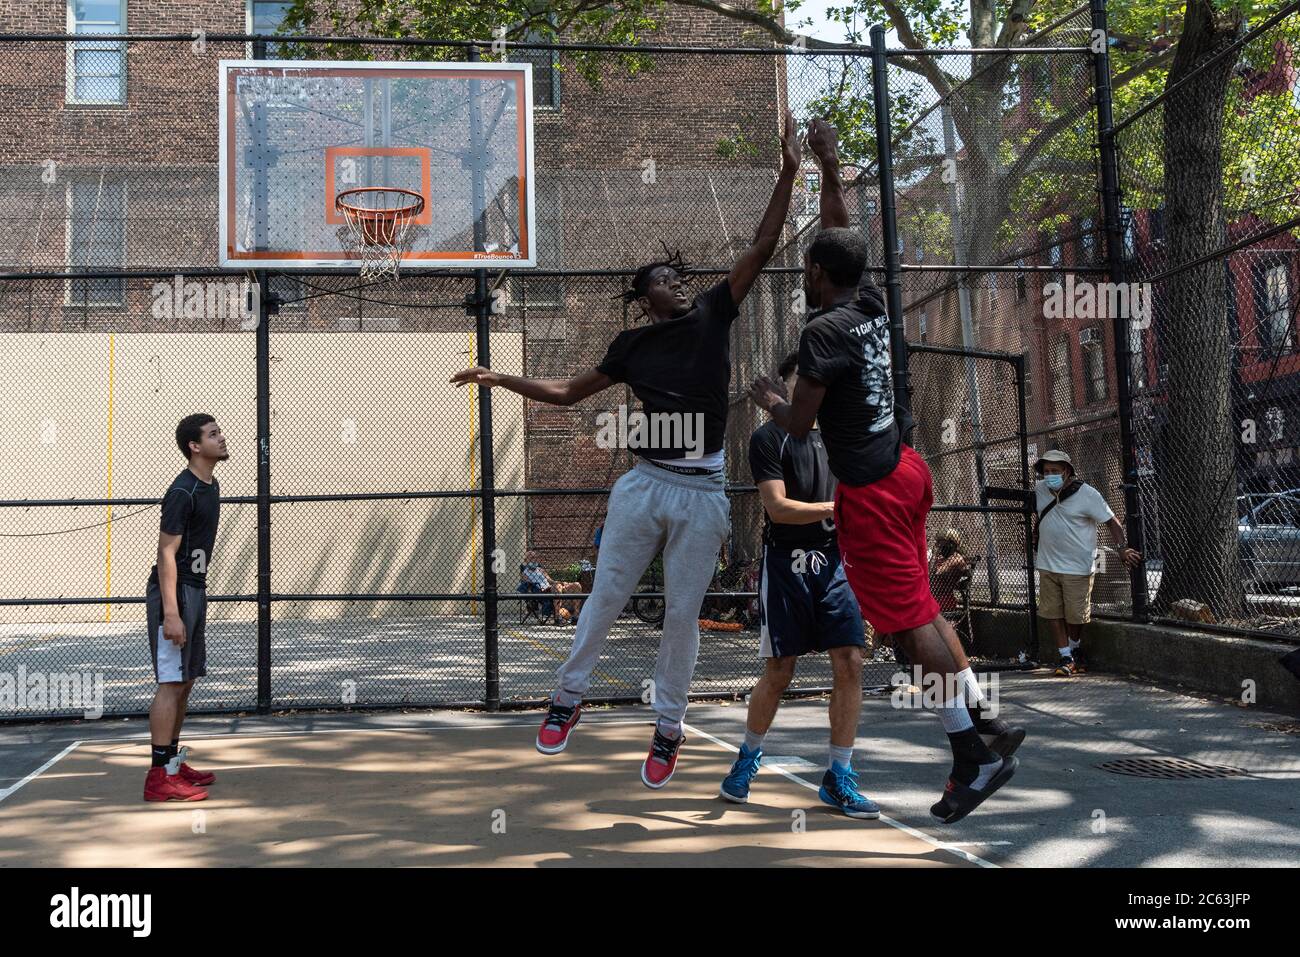 Players engage in a competitive game of basketball at the iconic West 4th  Street Courts or "The Cage" as New York City enters Phase 3 of the  Coronavirus opening on July 6,